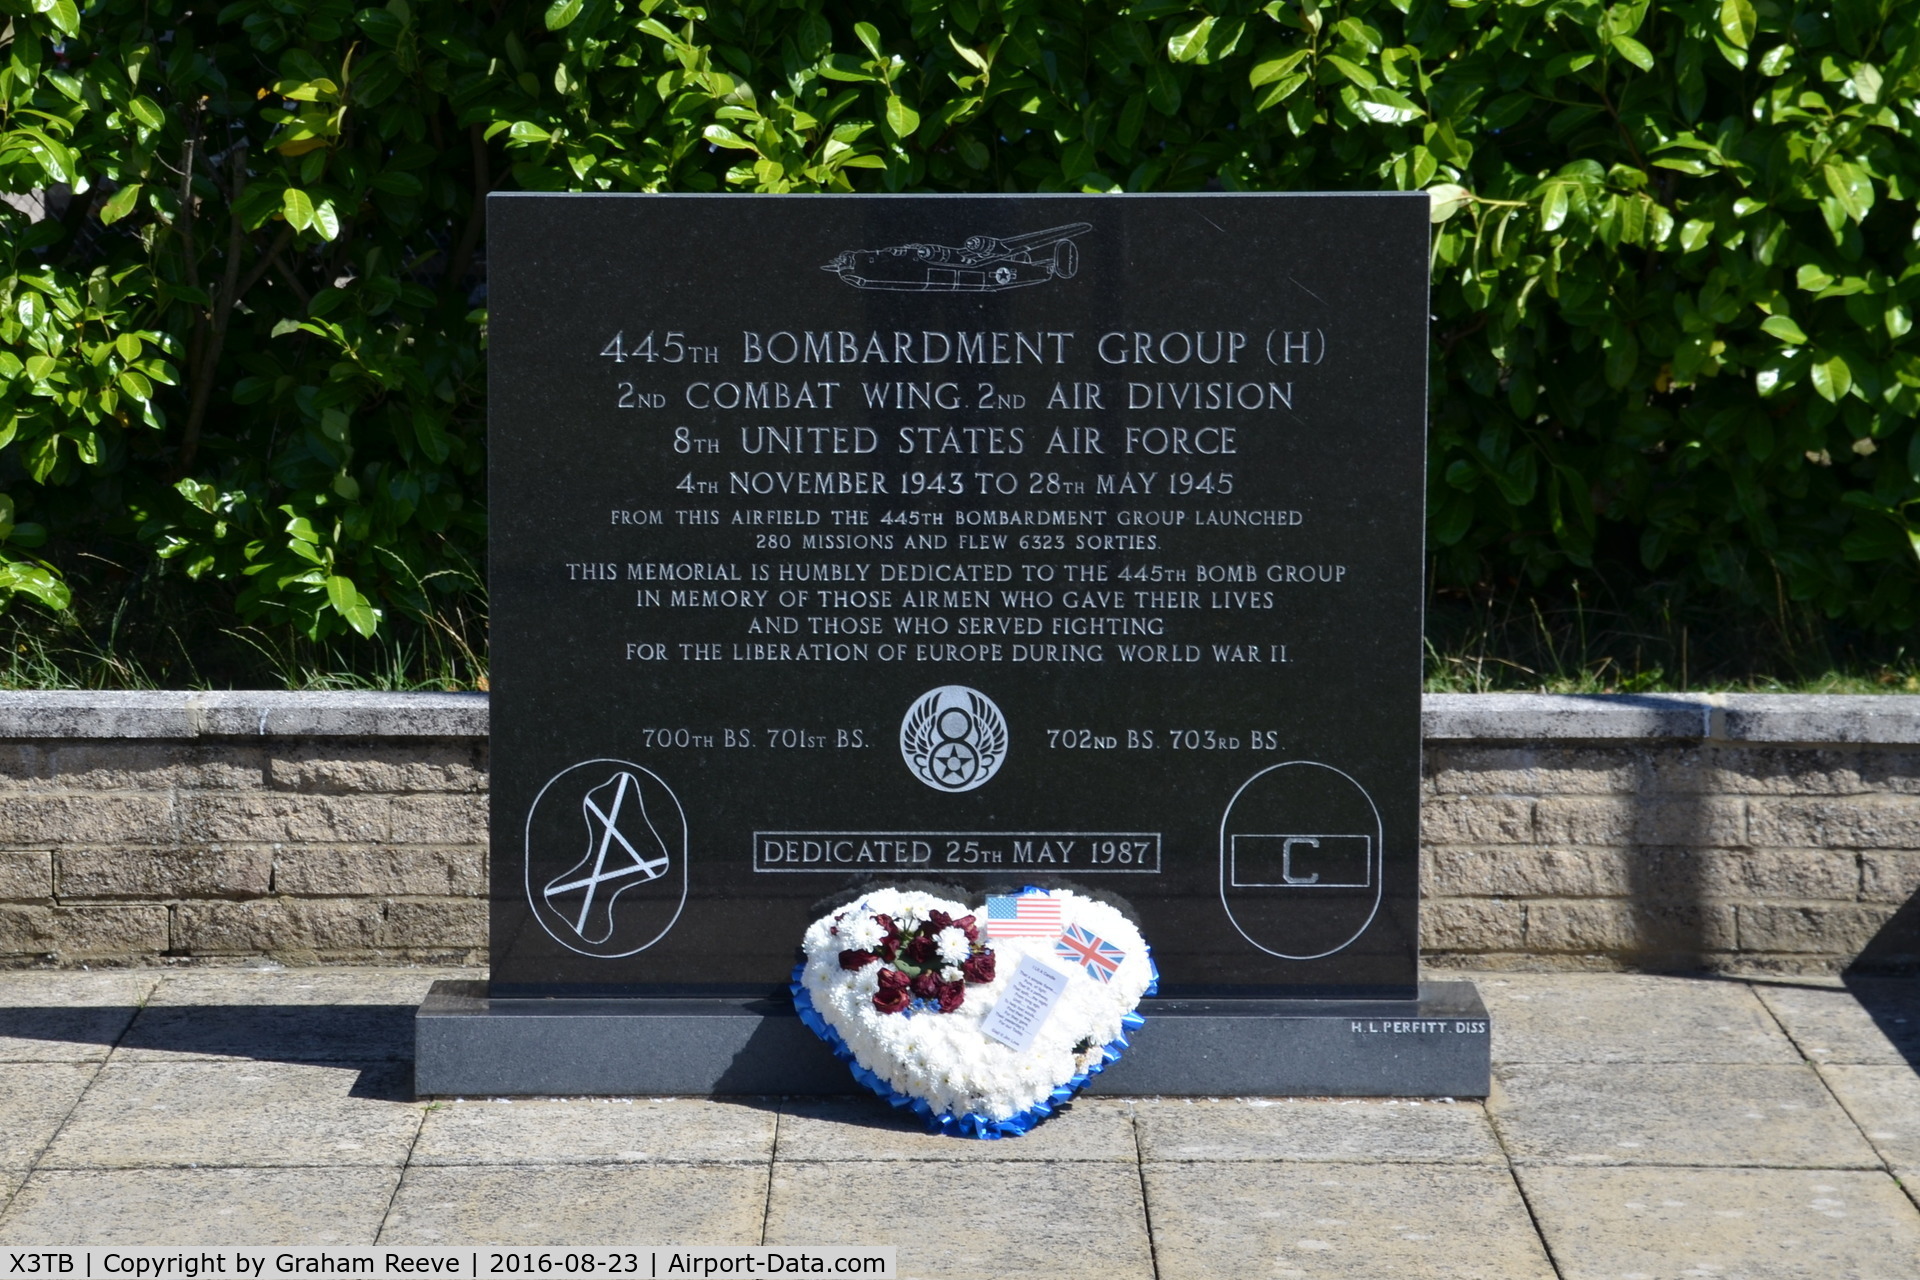 X3TB Airport - Memorial at Tibenham Airfield to those who gave their lives in World War Two. Dedicated to the 445th Bombardment Group, 2nd Combat Wing and the 8th USAF.